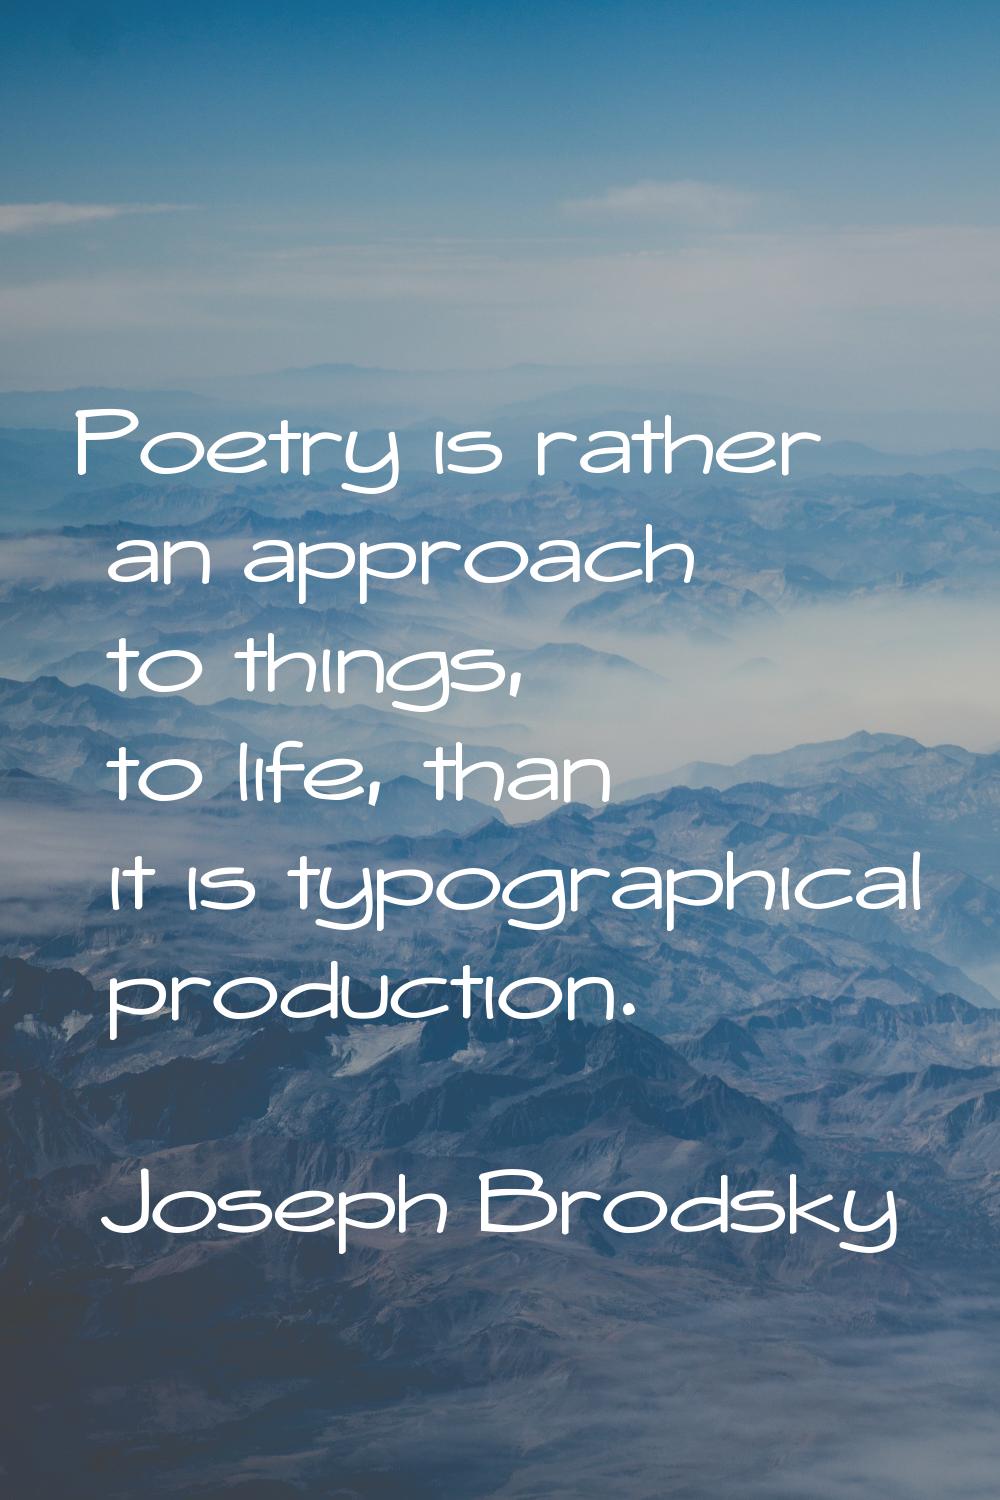 Poetry is rather an approach to things, to life, than it is typographical production.